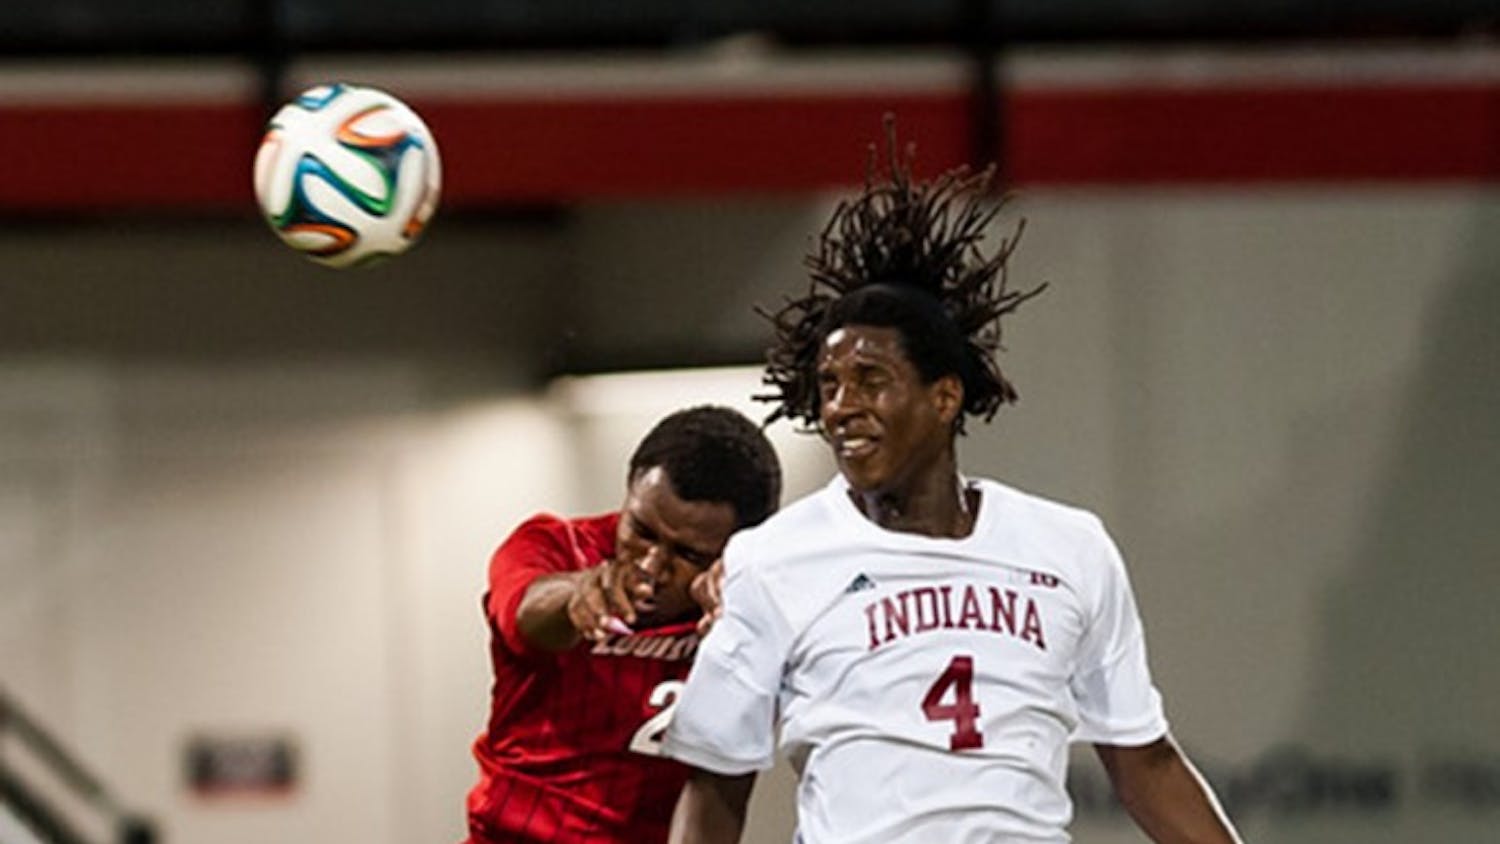 Junior Femi Hollinger-Janzen fights for the ball against Louisville's Michael DeGraffenreidt during IU's game against the Cardinals on Tuesday at Lynn Stadium in Louisville, Ky.